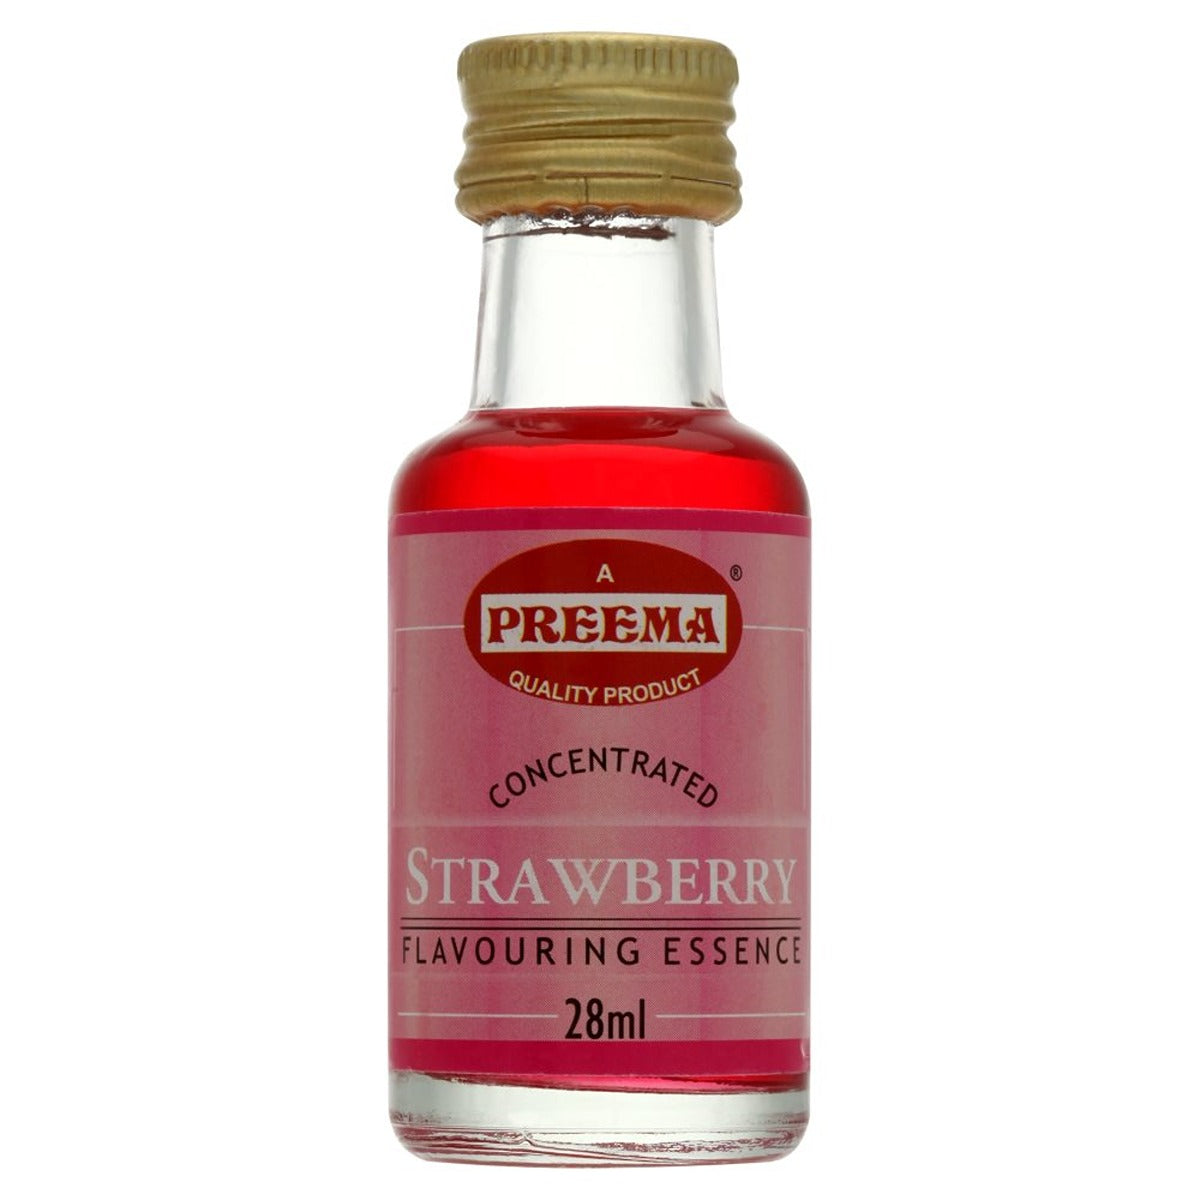 Preema - Concentrated Strawberry Flavouring Essence - 28ml strawberry flavouring essence.